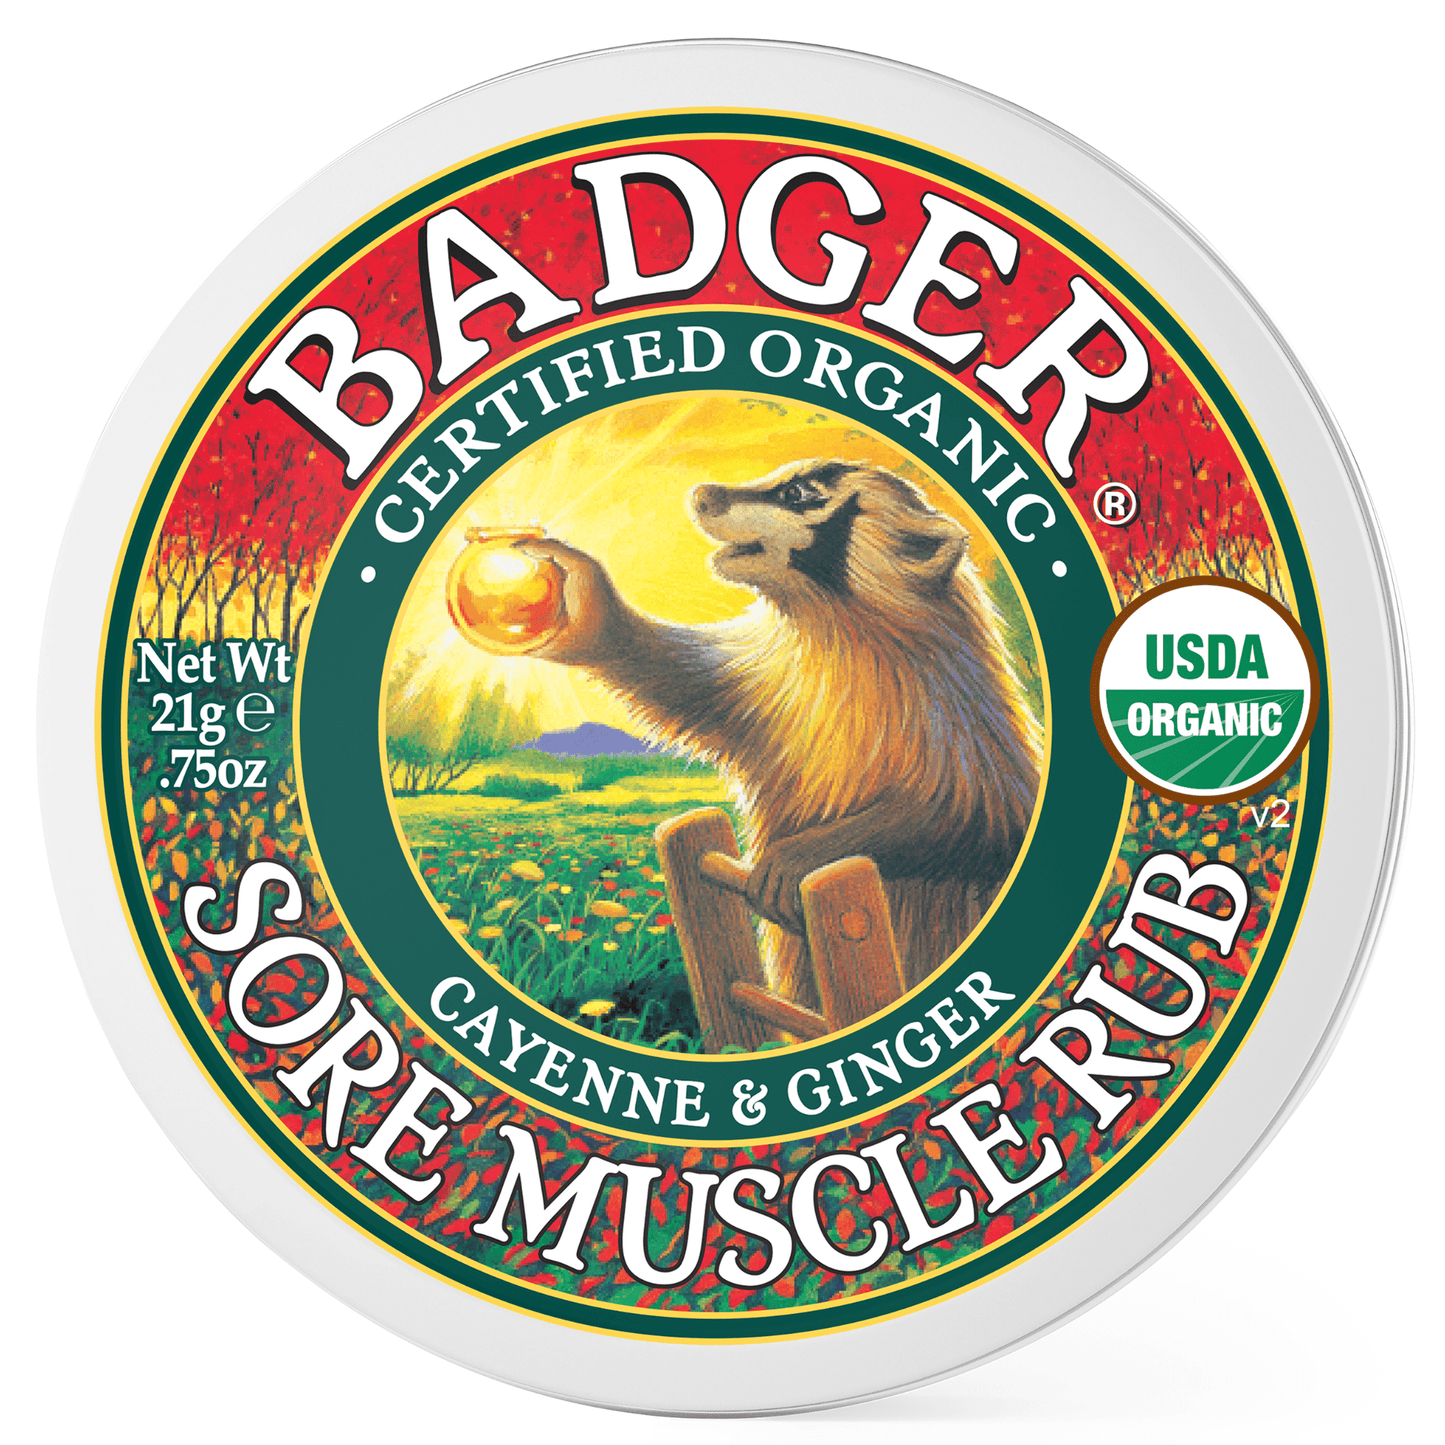 Primary Image of Sore Muscle Rub Balm Small Tin